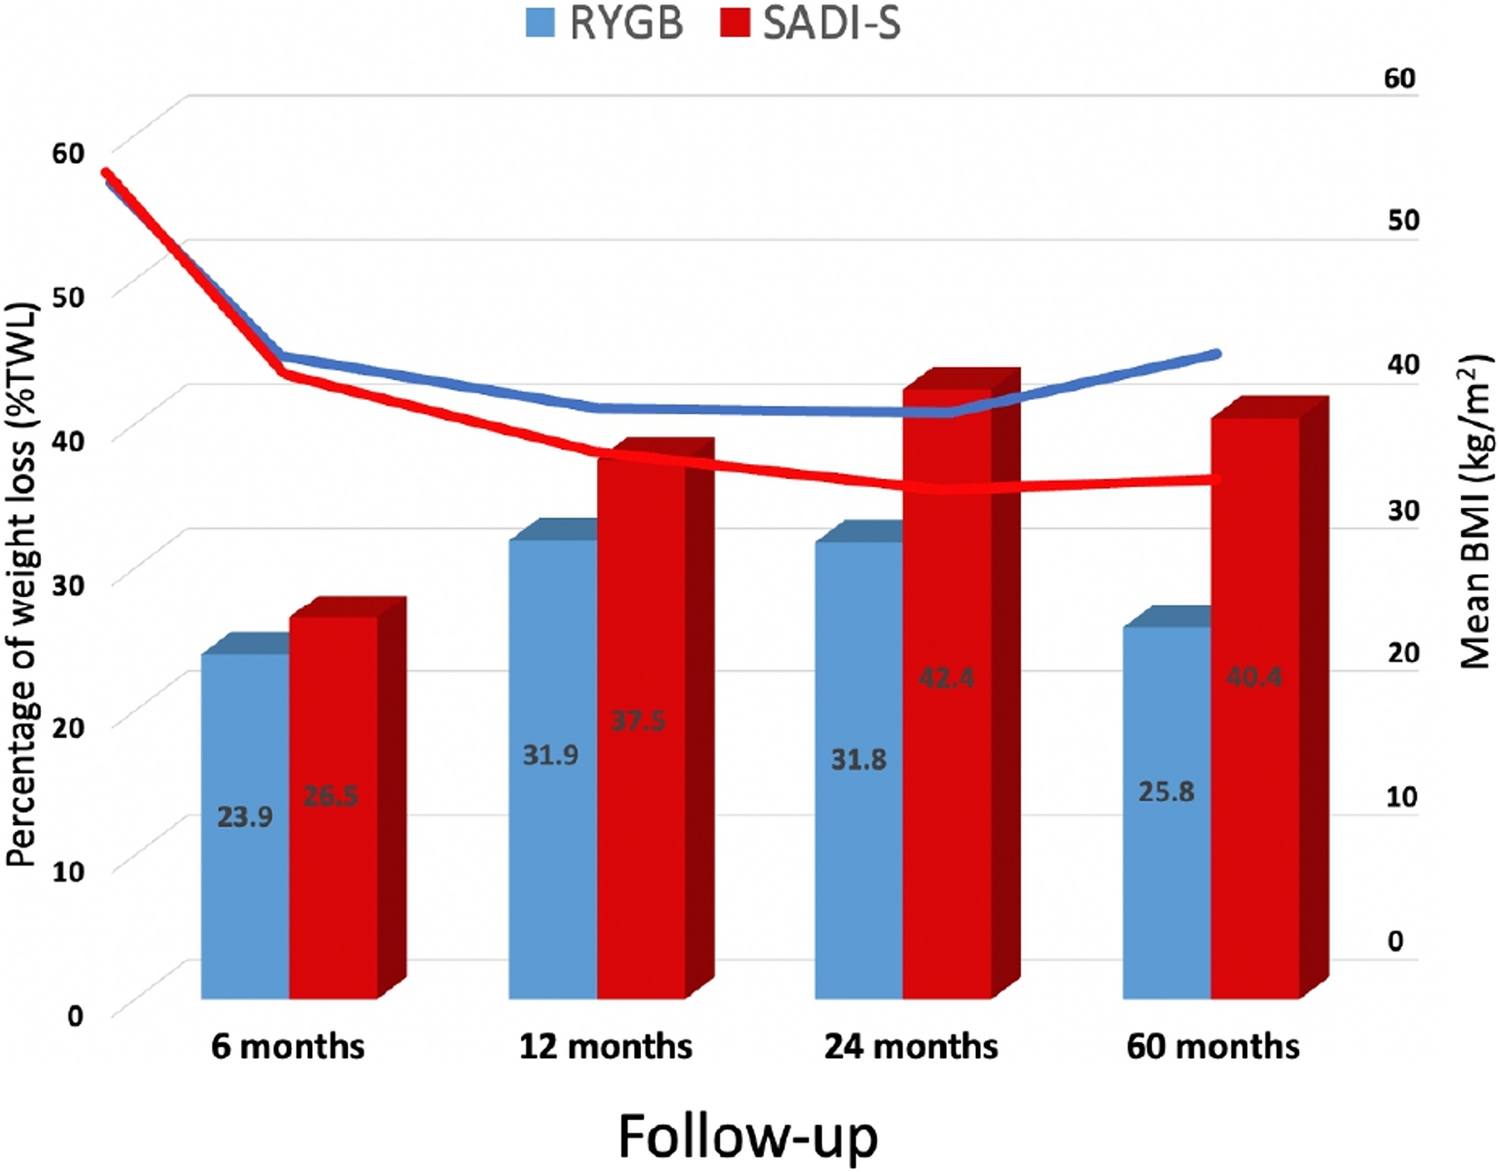 Single anastomosis duodenal switch versus Roux-en-Y gastric bypass in patients with BMI ≥ 50 kg/m2: a multi-centered comparative analysis